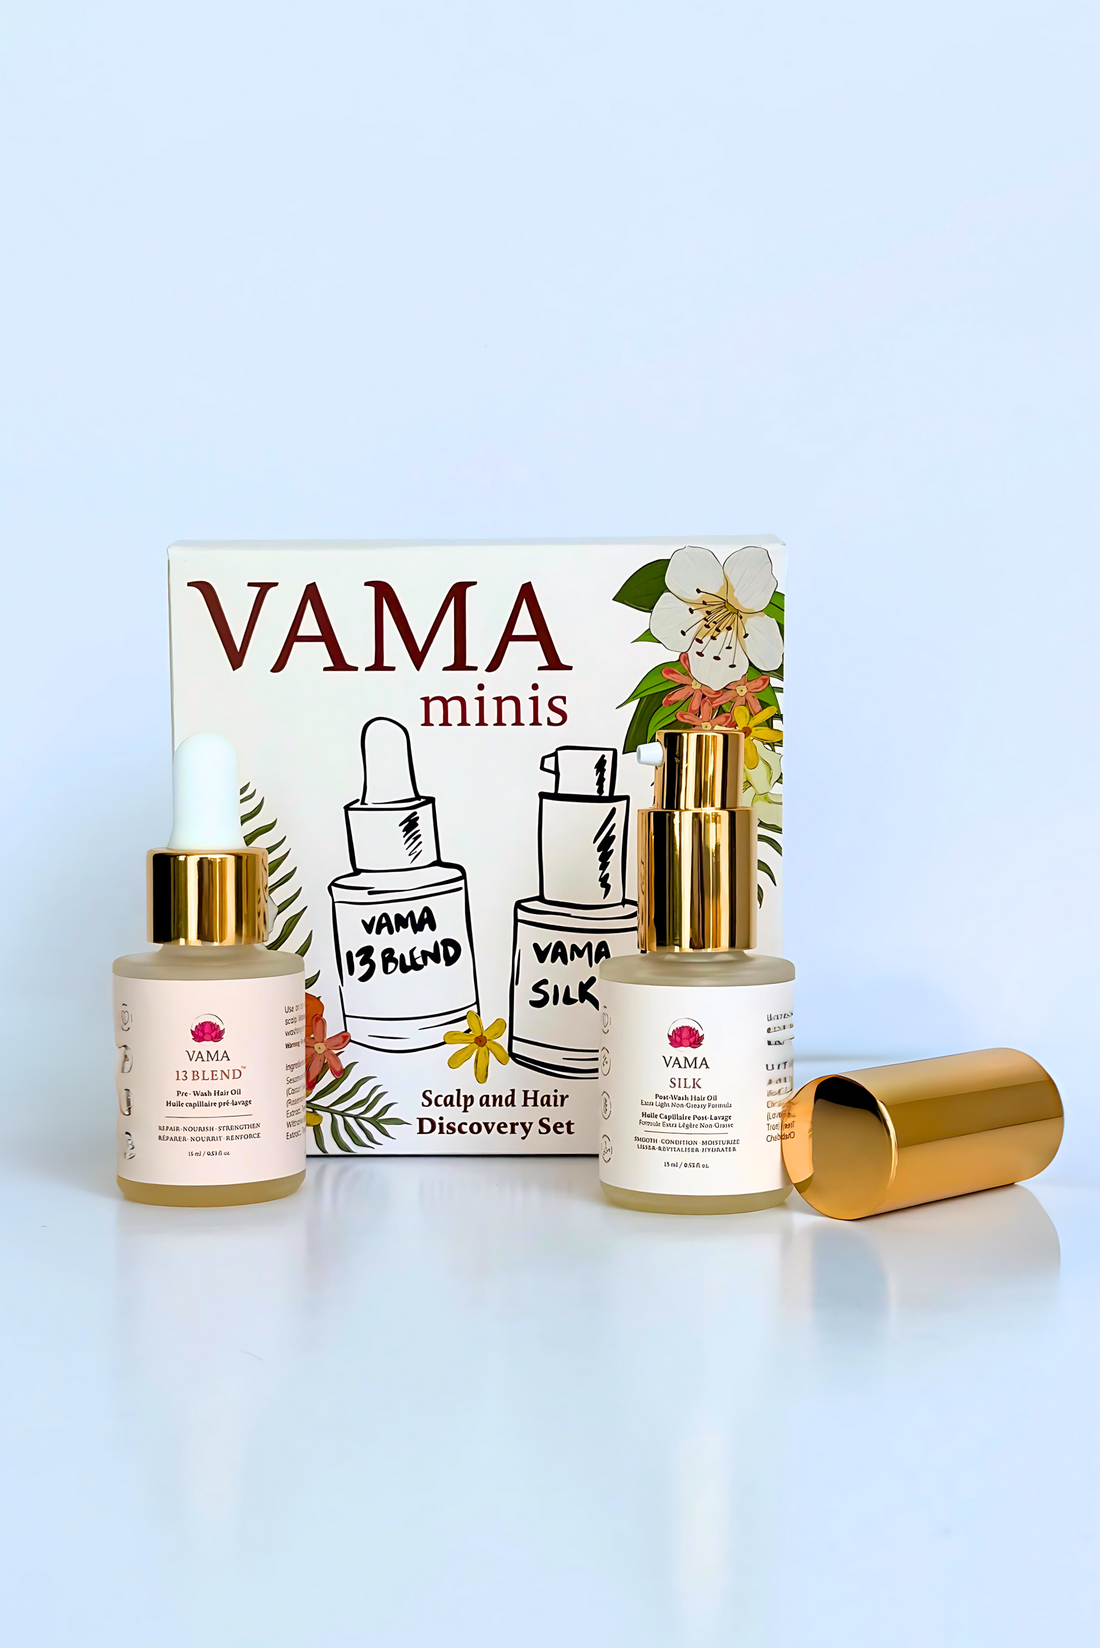 Vama Minis Scalp and Hair Discovery Set